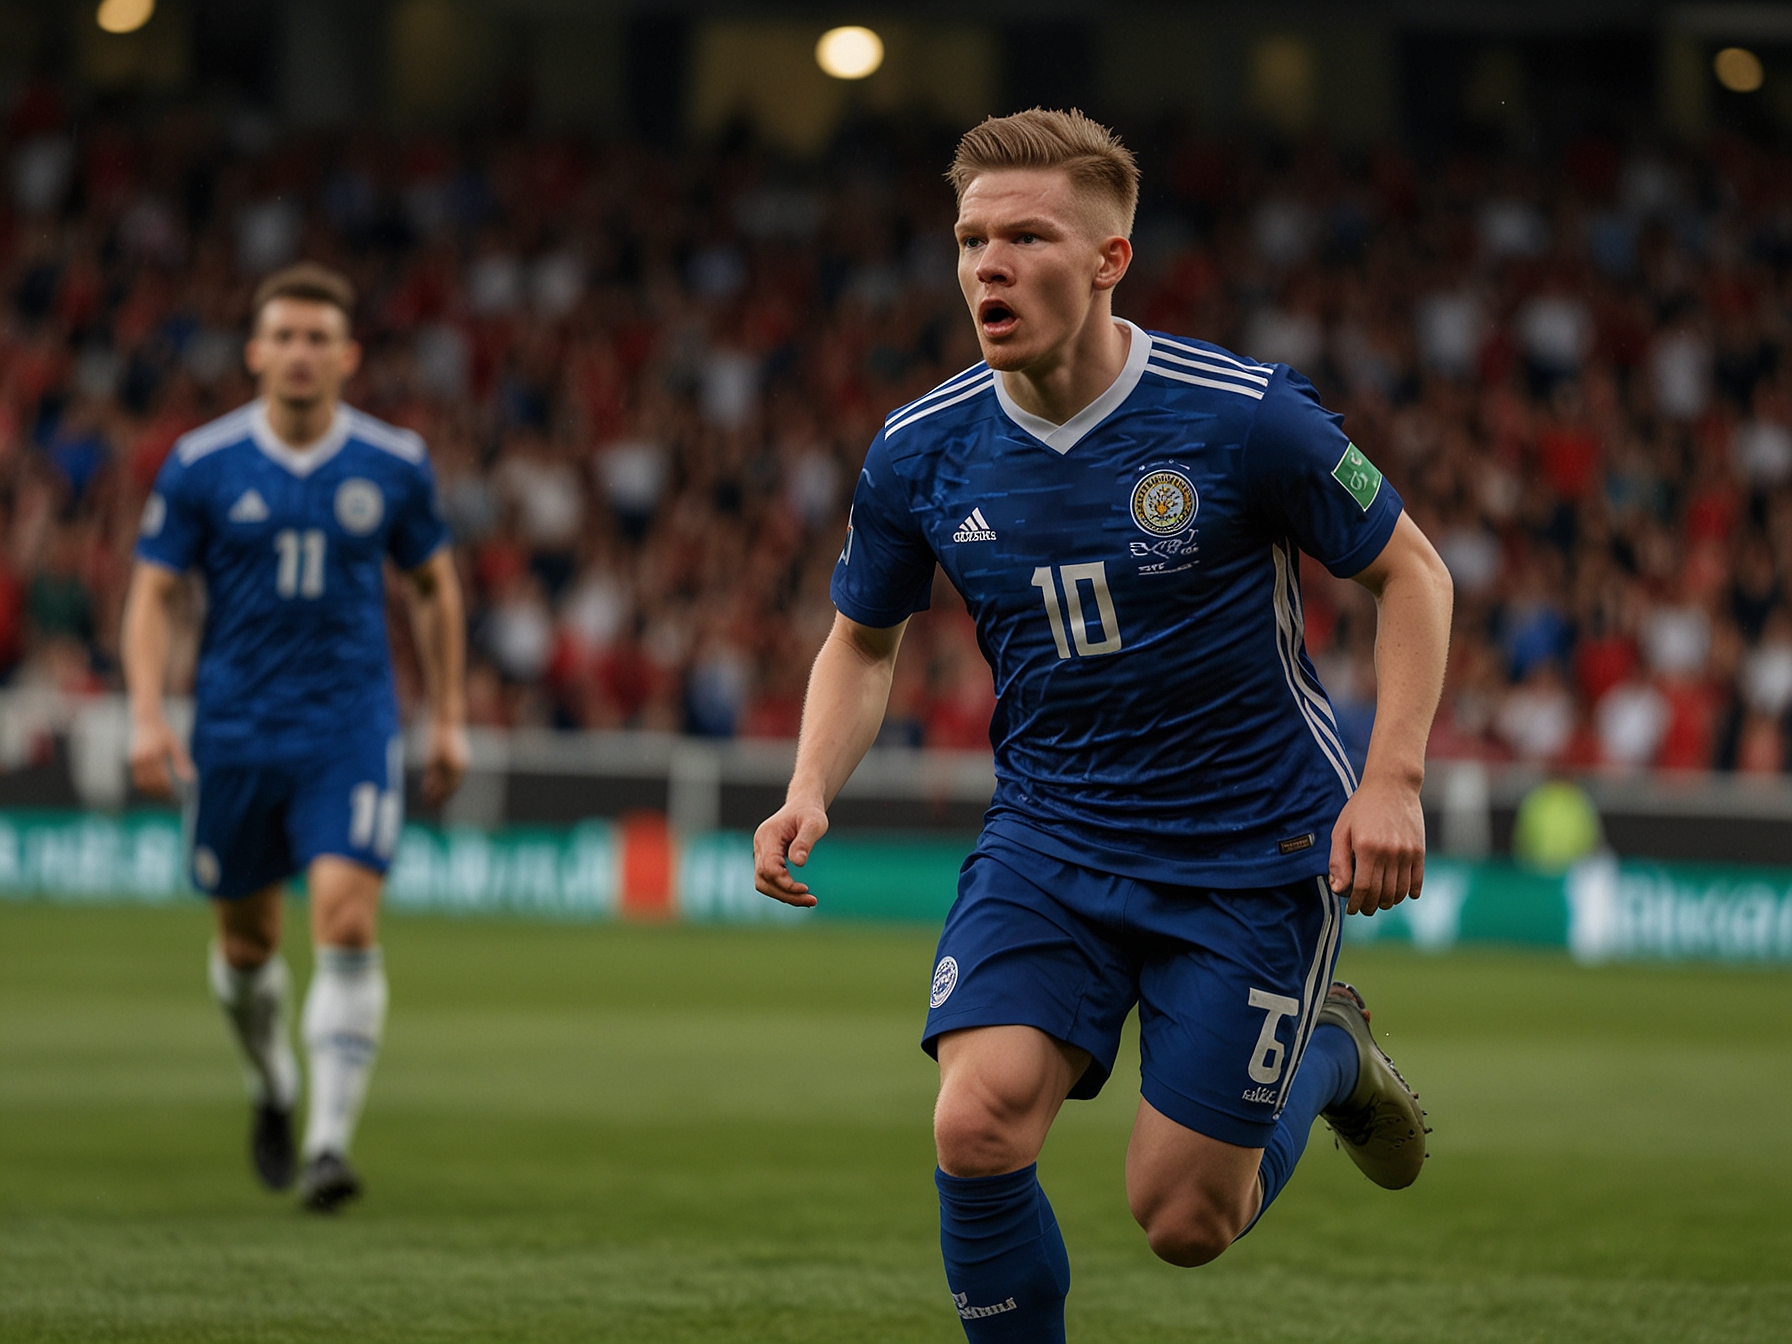 Scott McTominay, in action for Scotland, making a forward run towards the Hungarian goal during a high-stakes match. His determined expression and dynamic movement highlight his offensive capabilities.